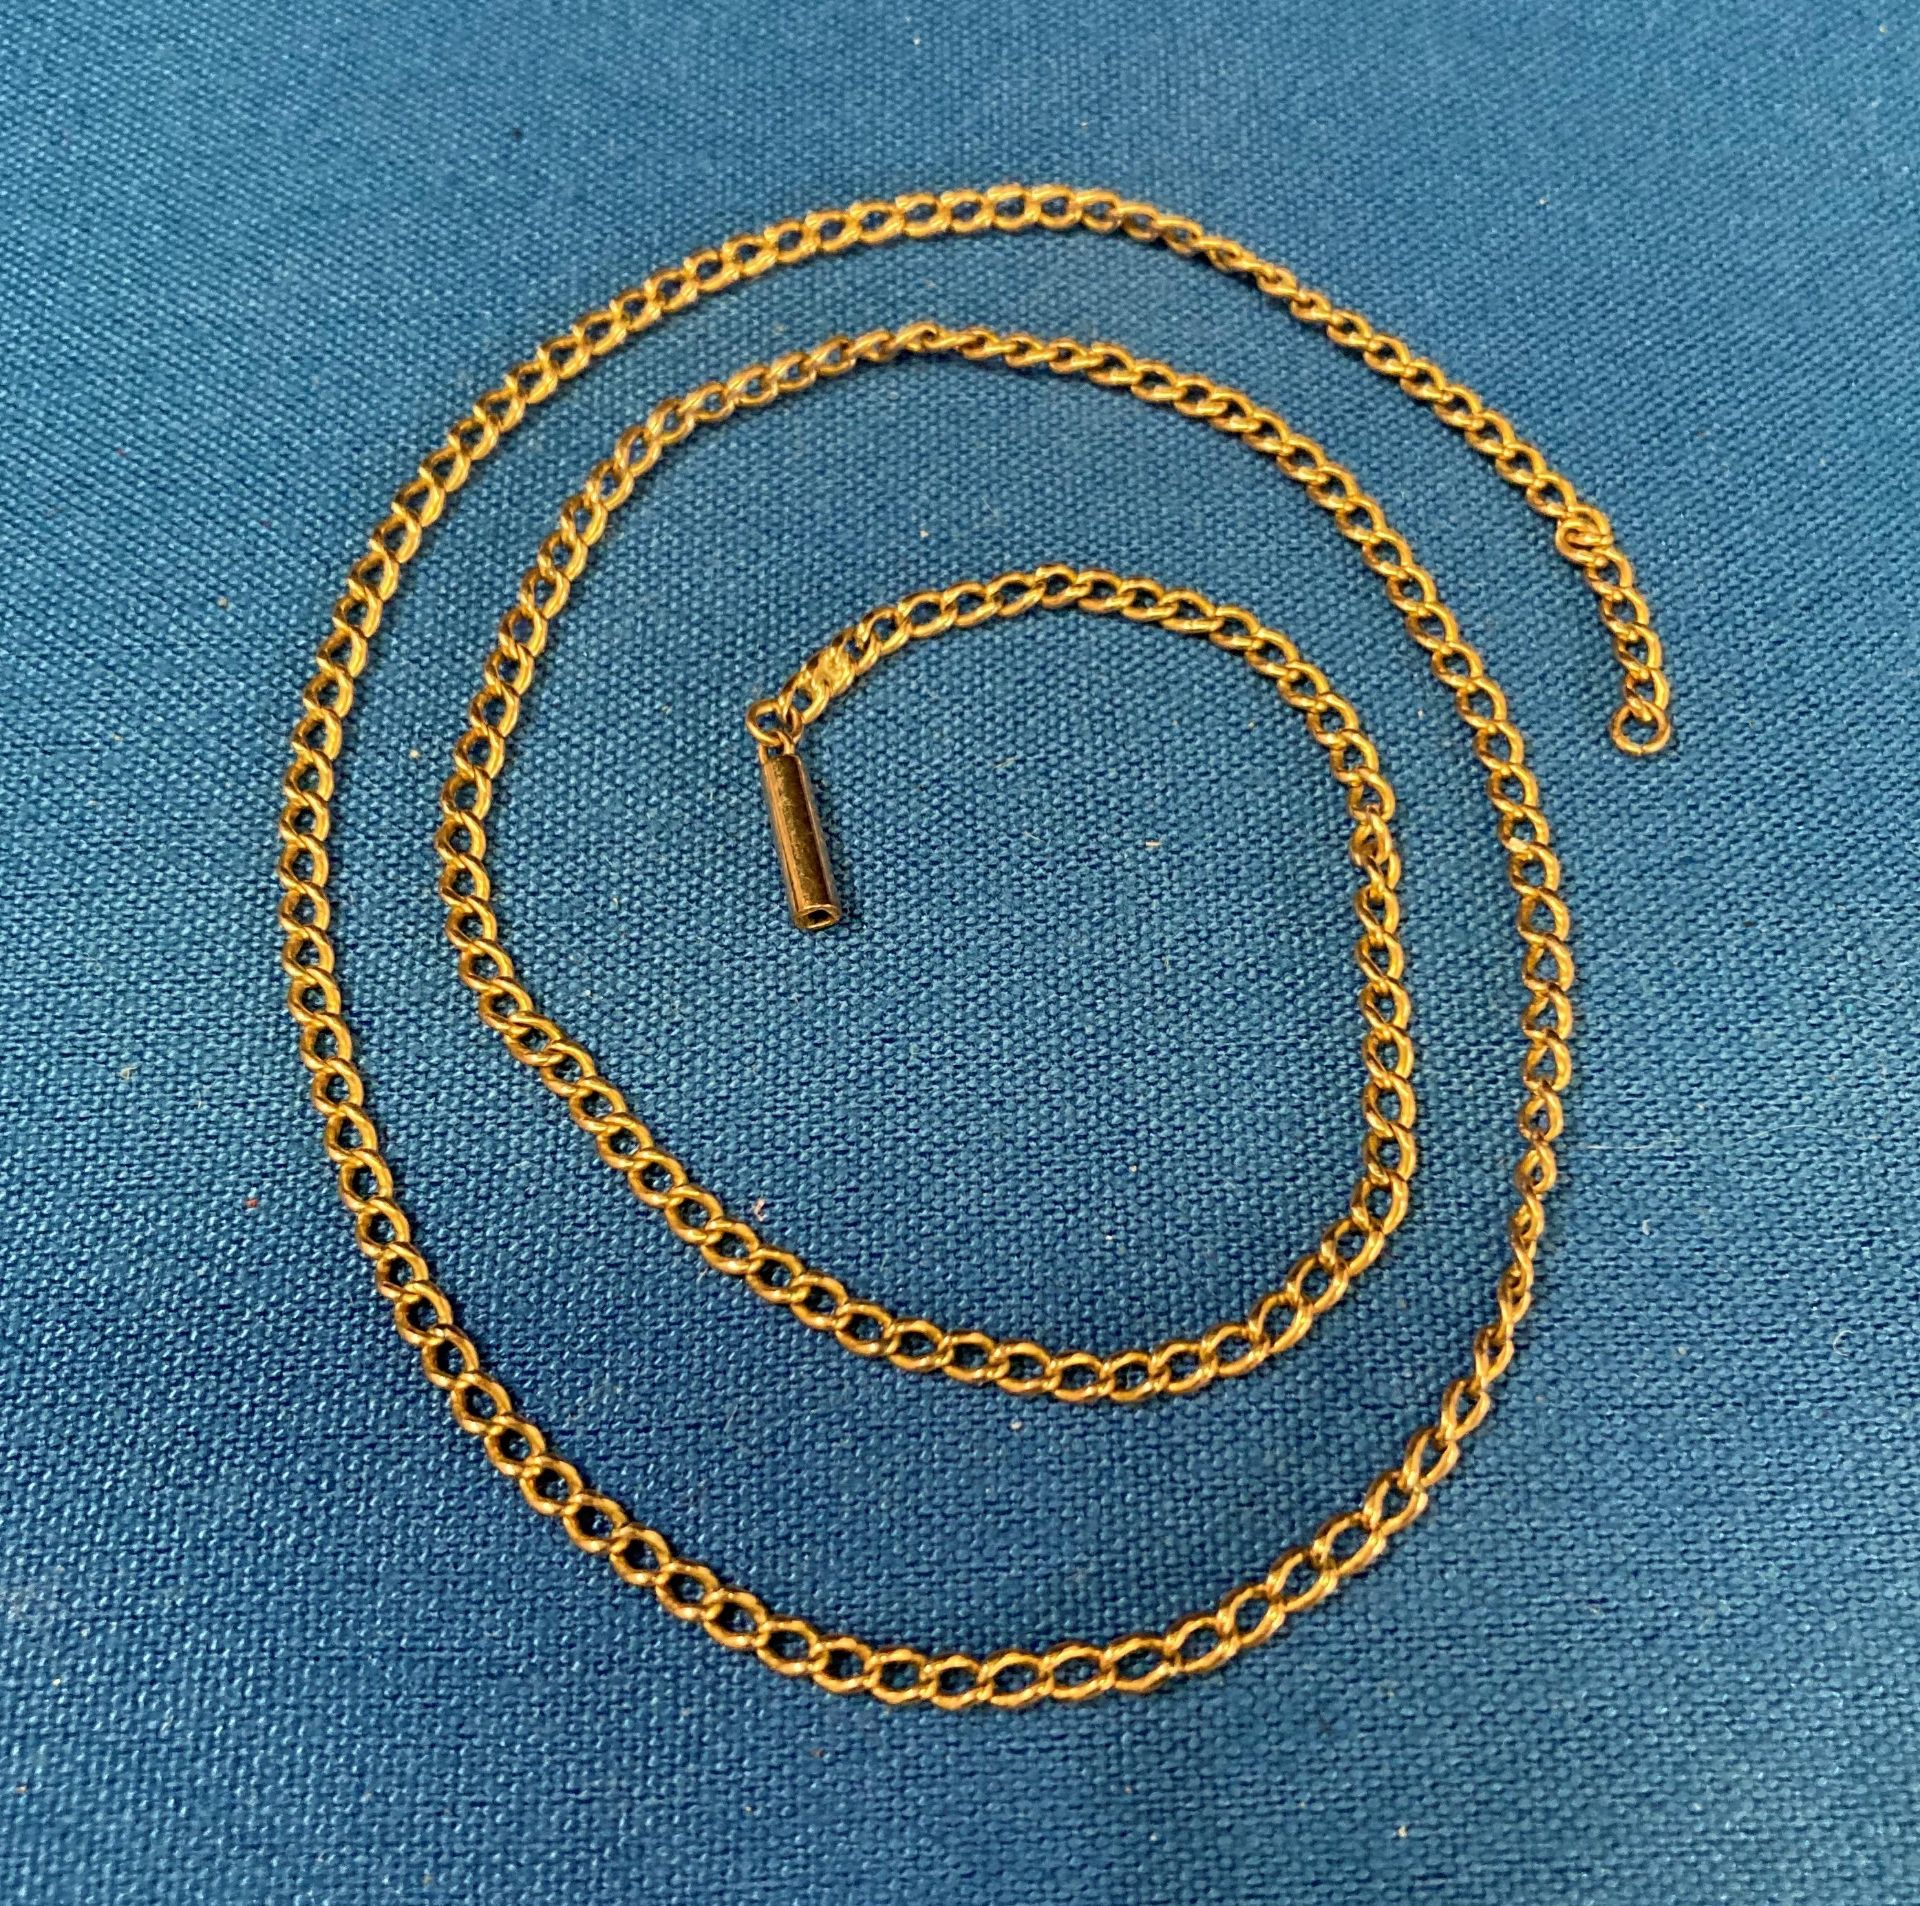 Two 9ct gold (375) chain, 17" and 18" long - both broken. - Image 2 of 3